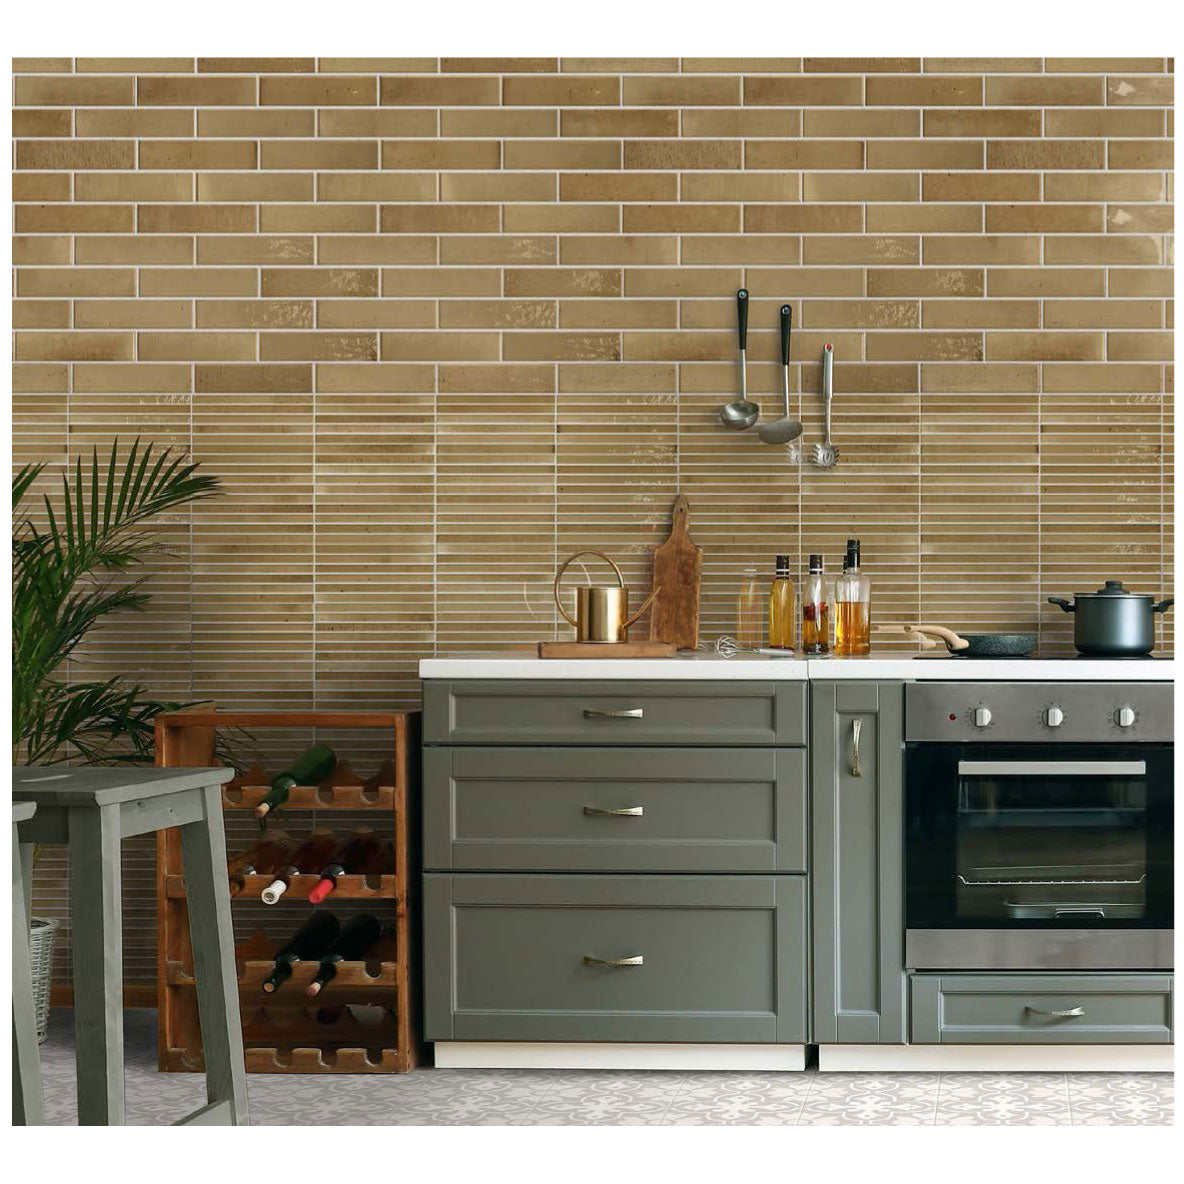 Cobsa - Homey Series 5 in. x 10 in. Porcelain Subway Tile - Curry Installed